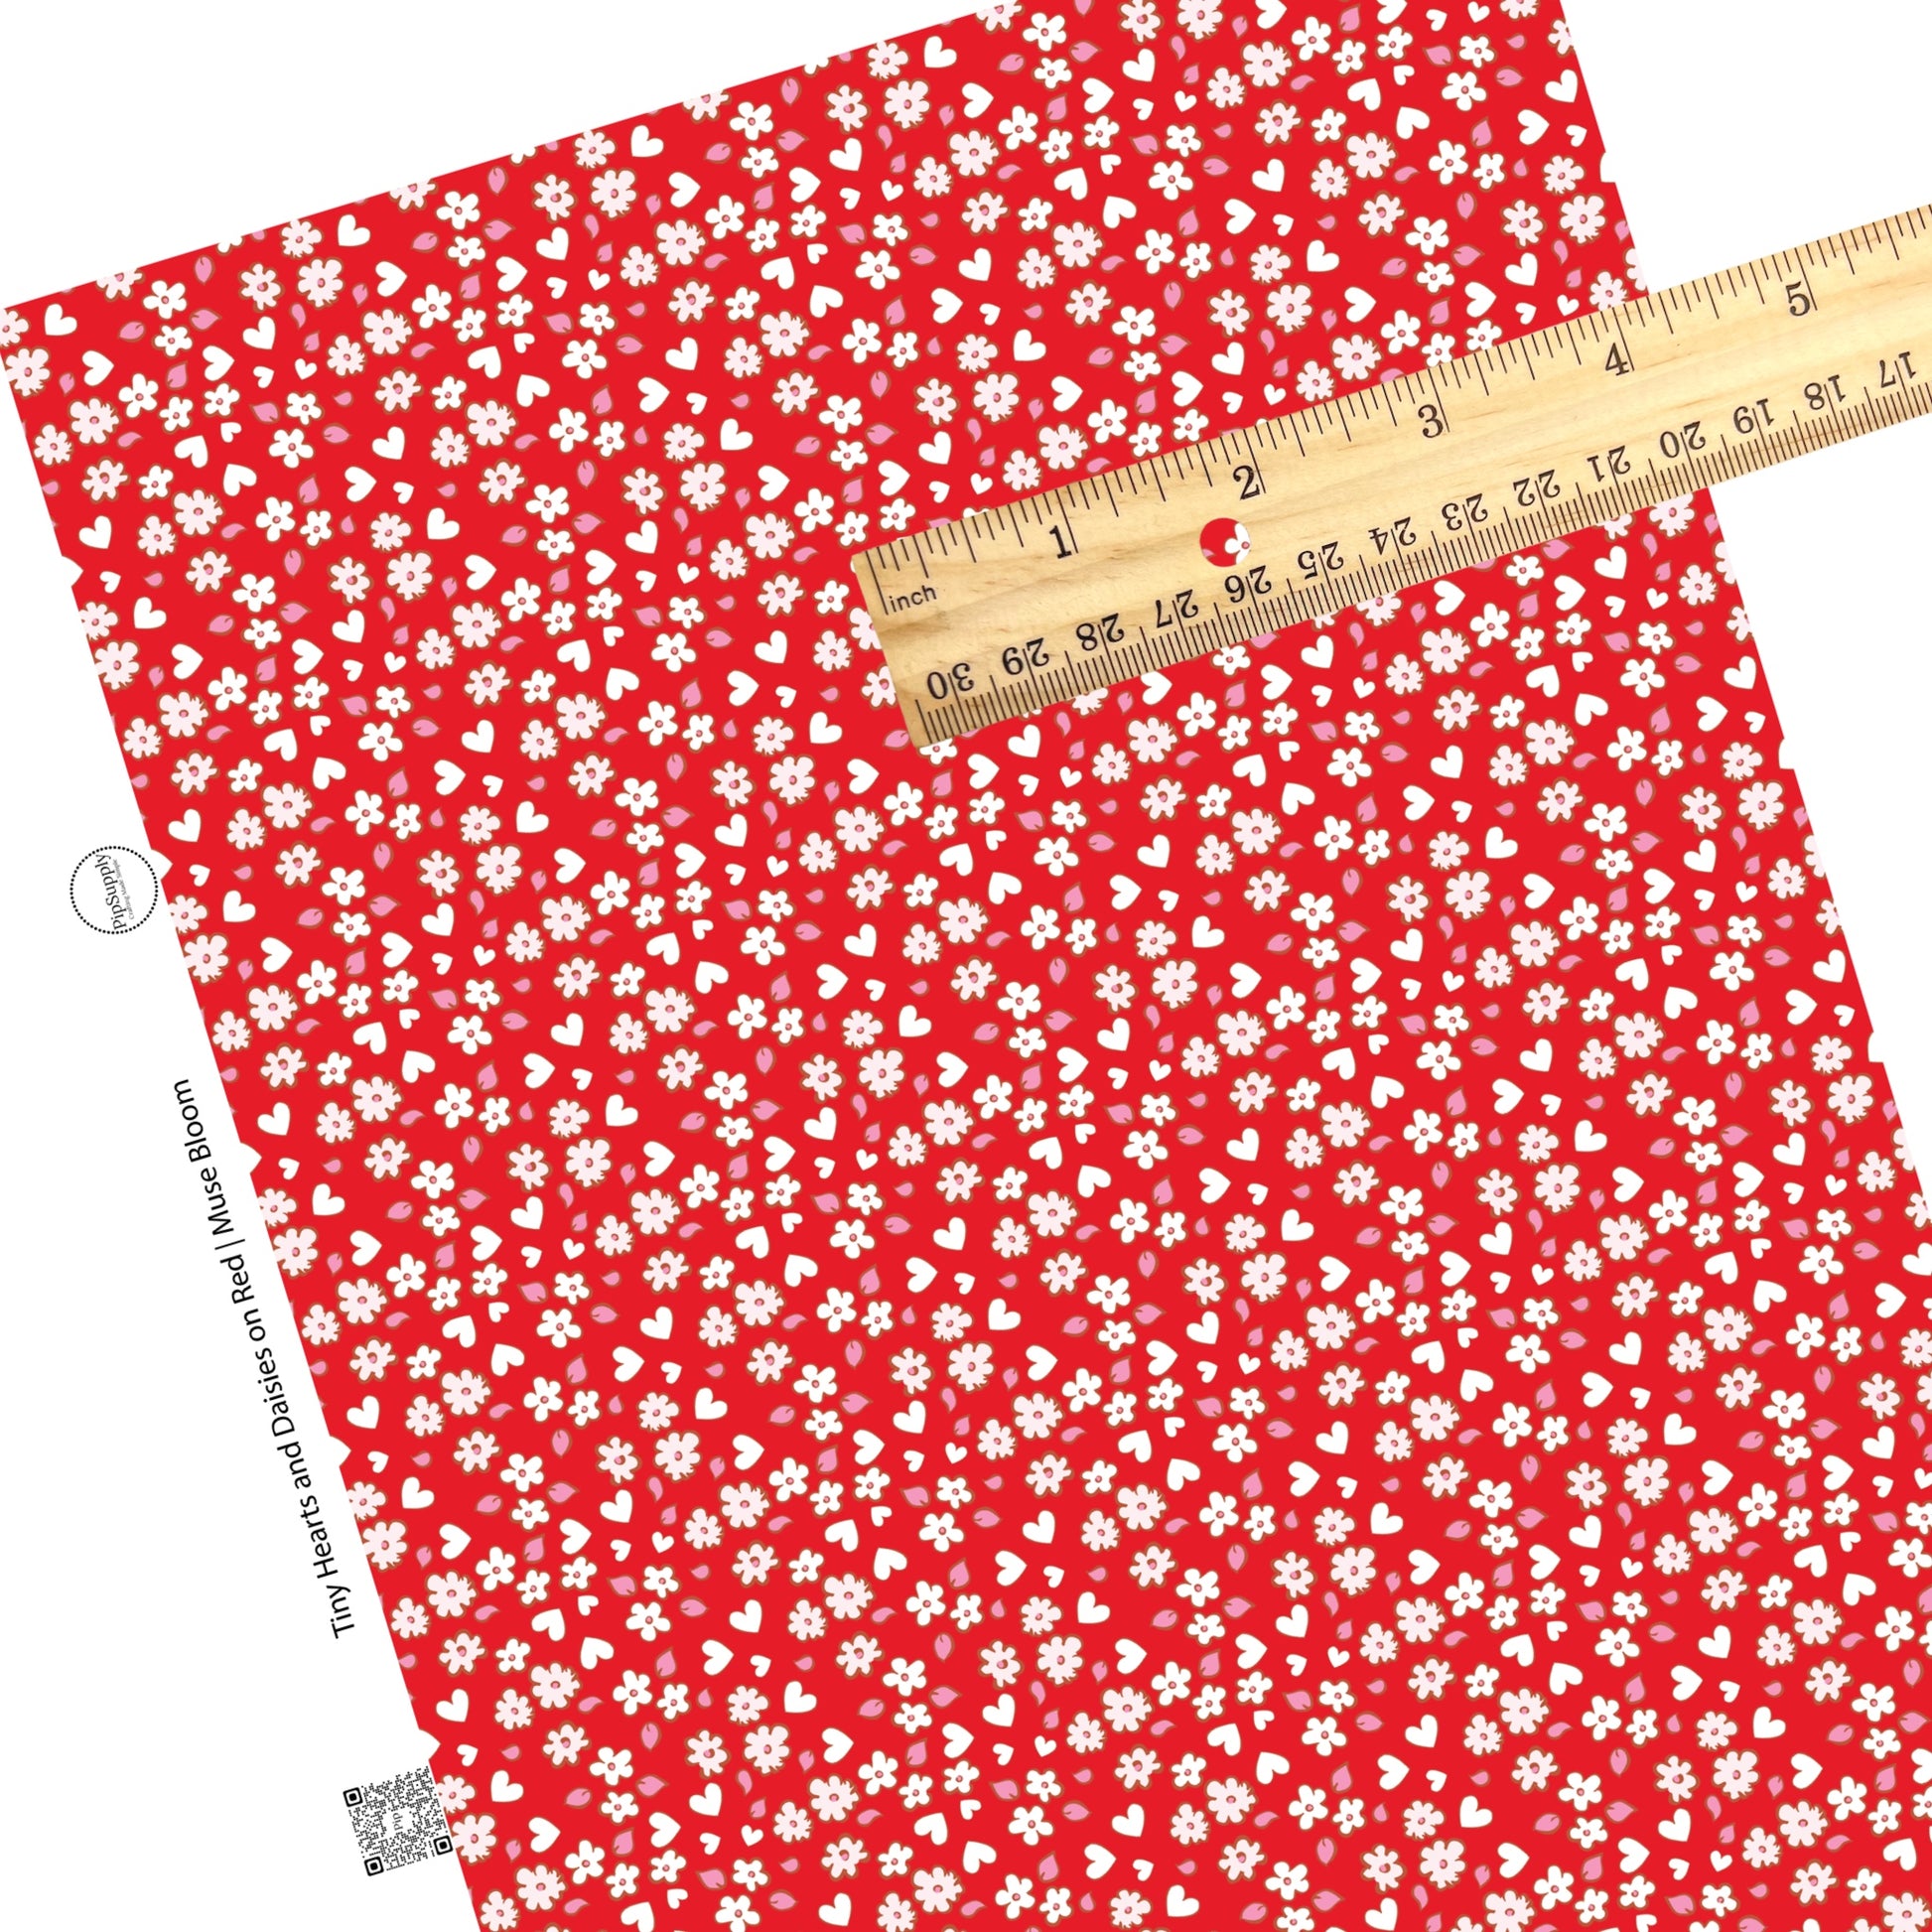 These Valentine's pattern themed faux leather sheets contain the following design elements: white daisies, white hearts, and tiny pink leaves on red. Our CPSIA compliant faux leather sheets or rolls can be used for all types of crafting projects.